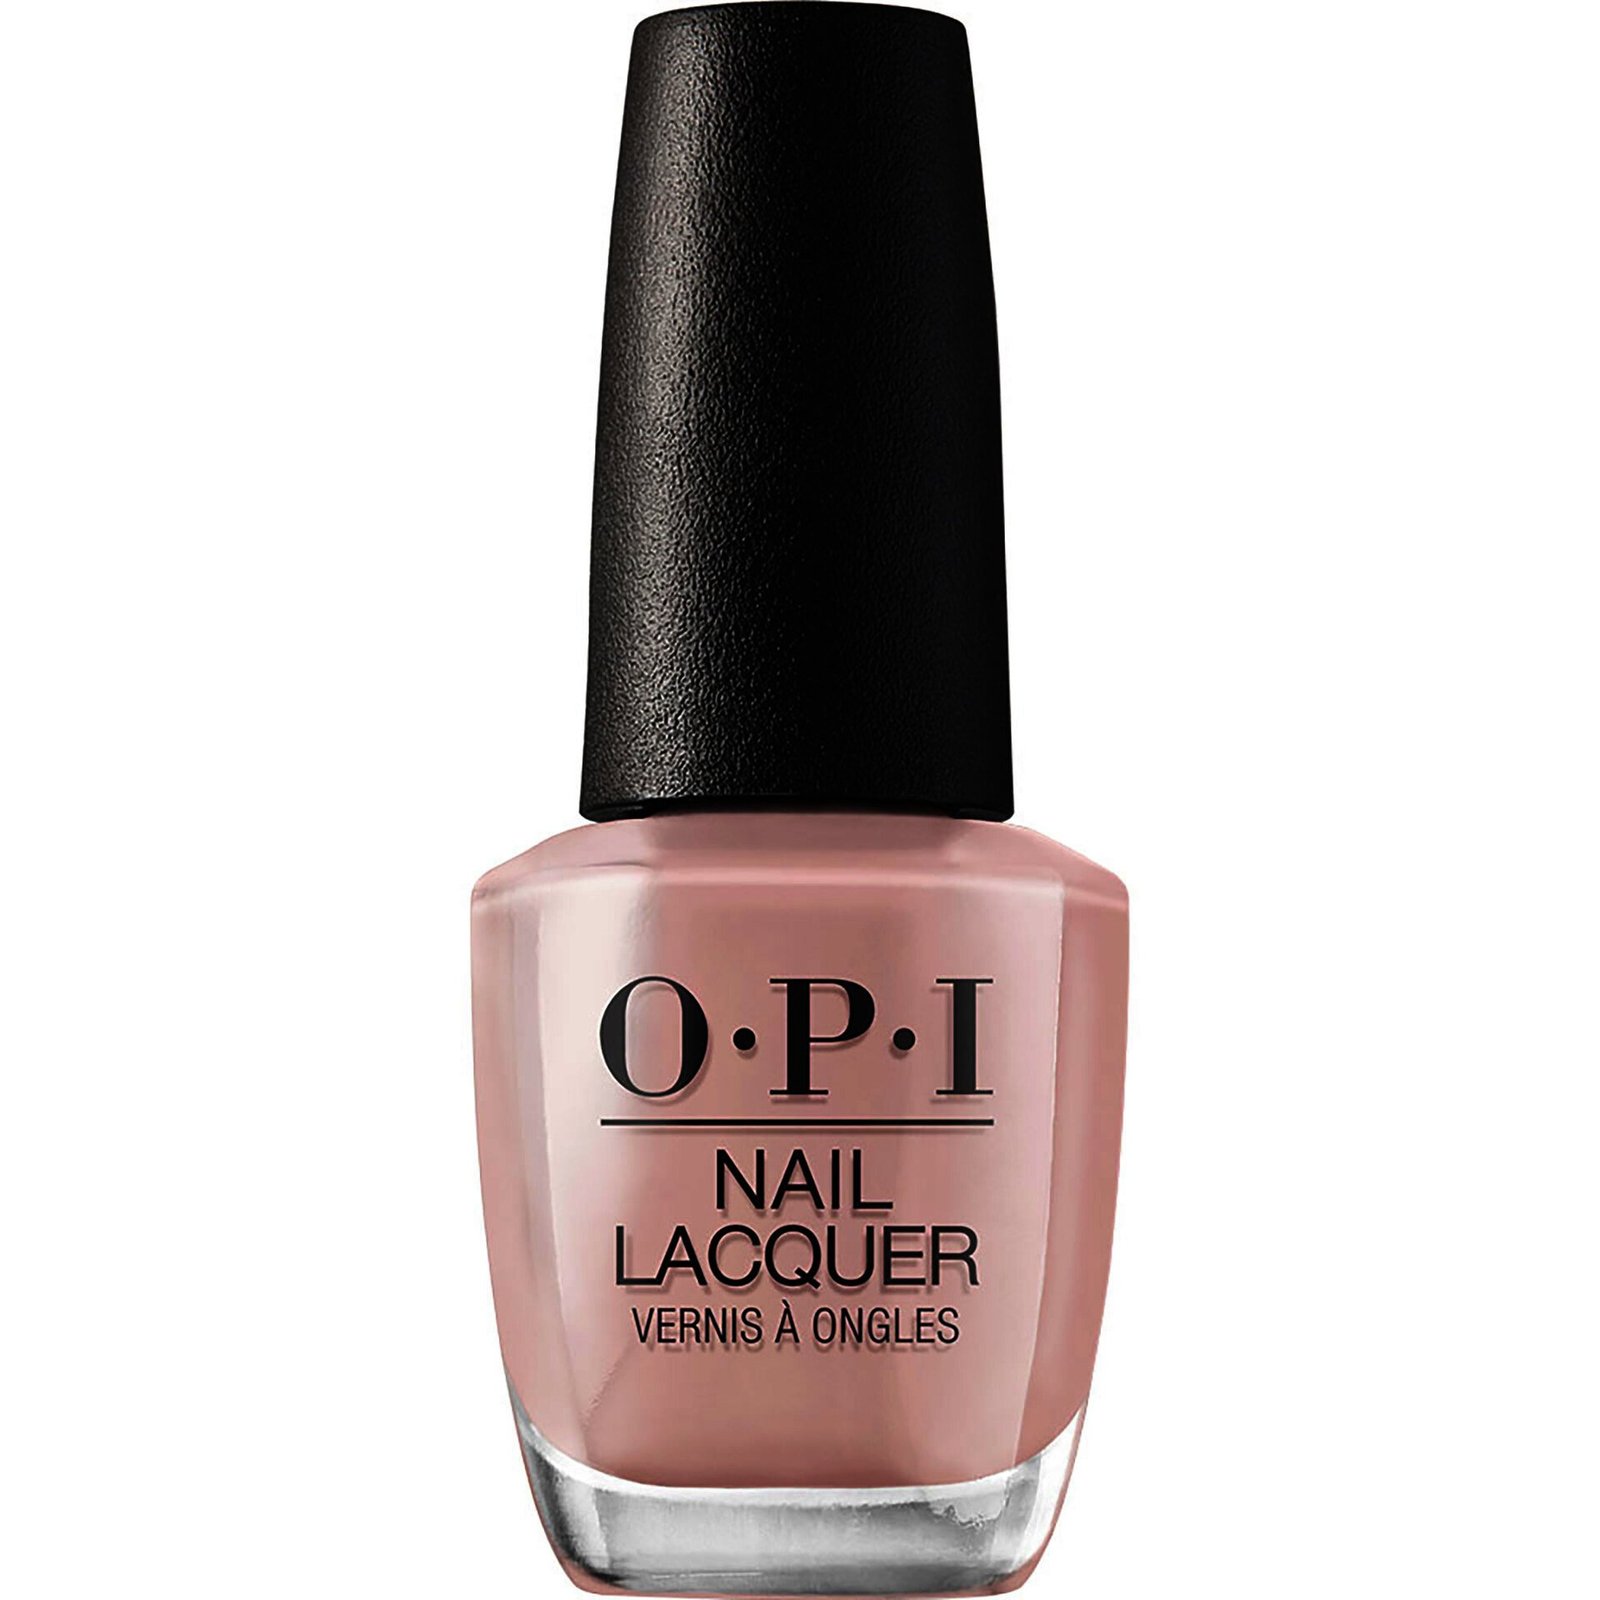 OPI Nail Lacquer Bare my Soul 15 ml